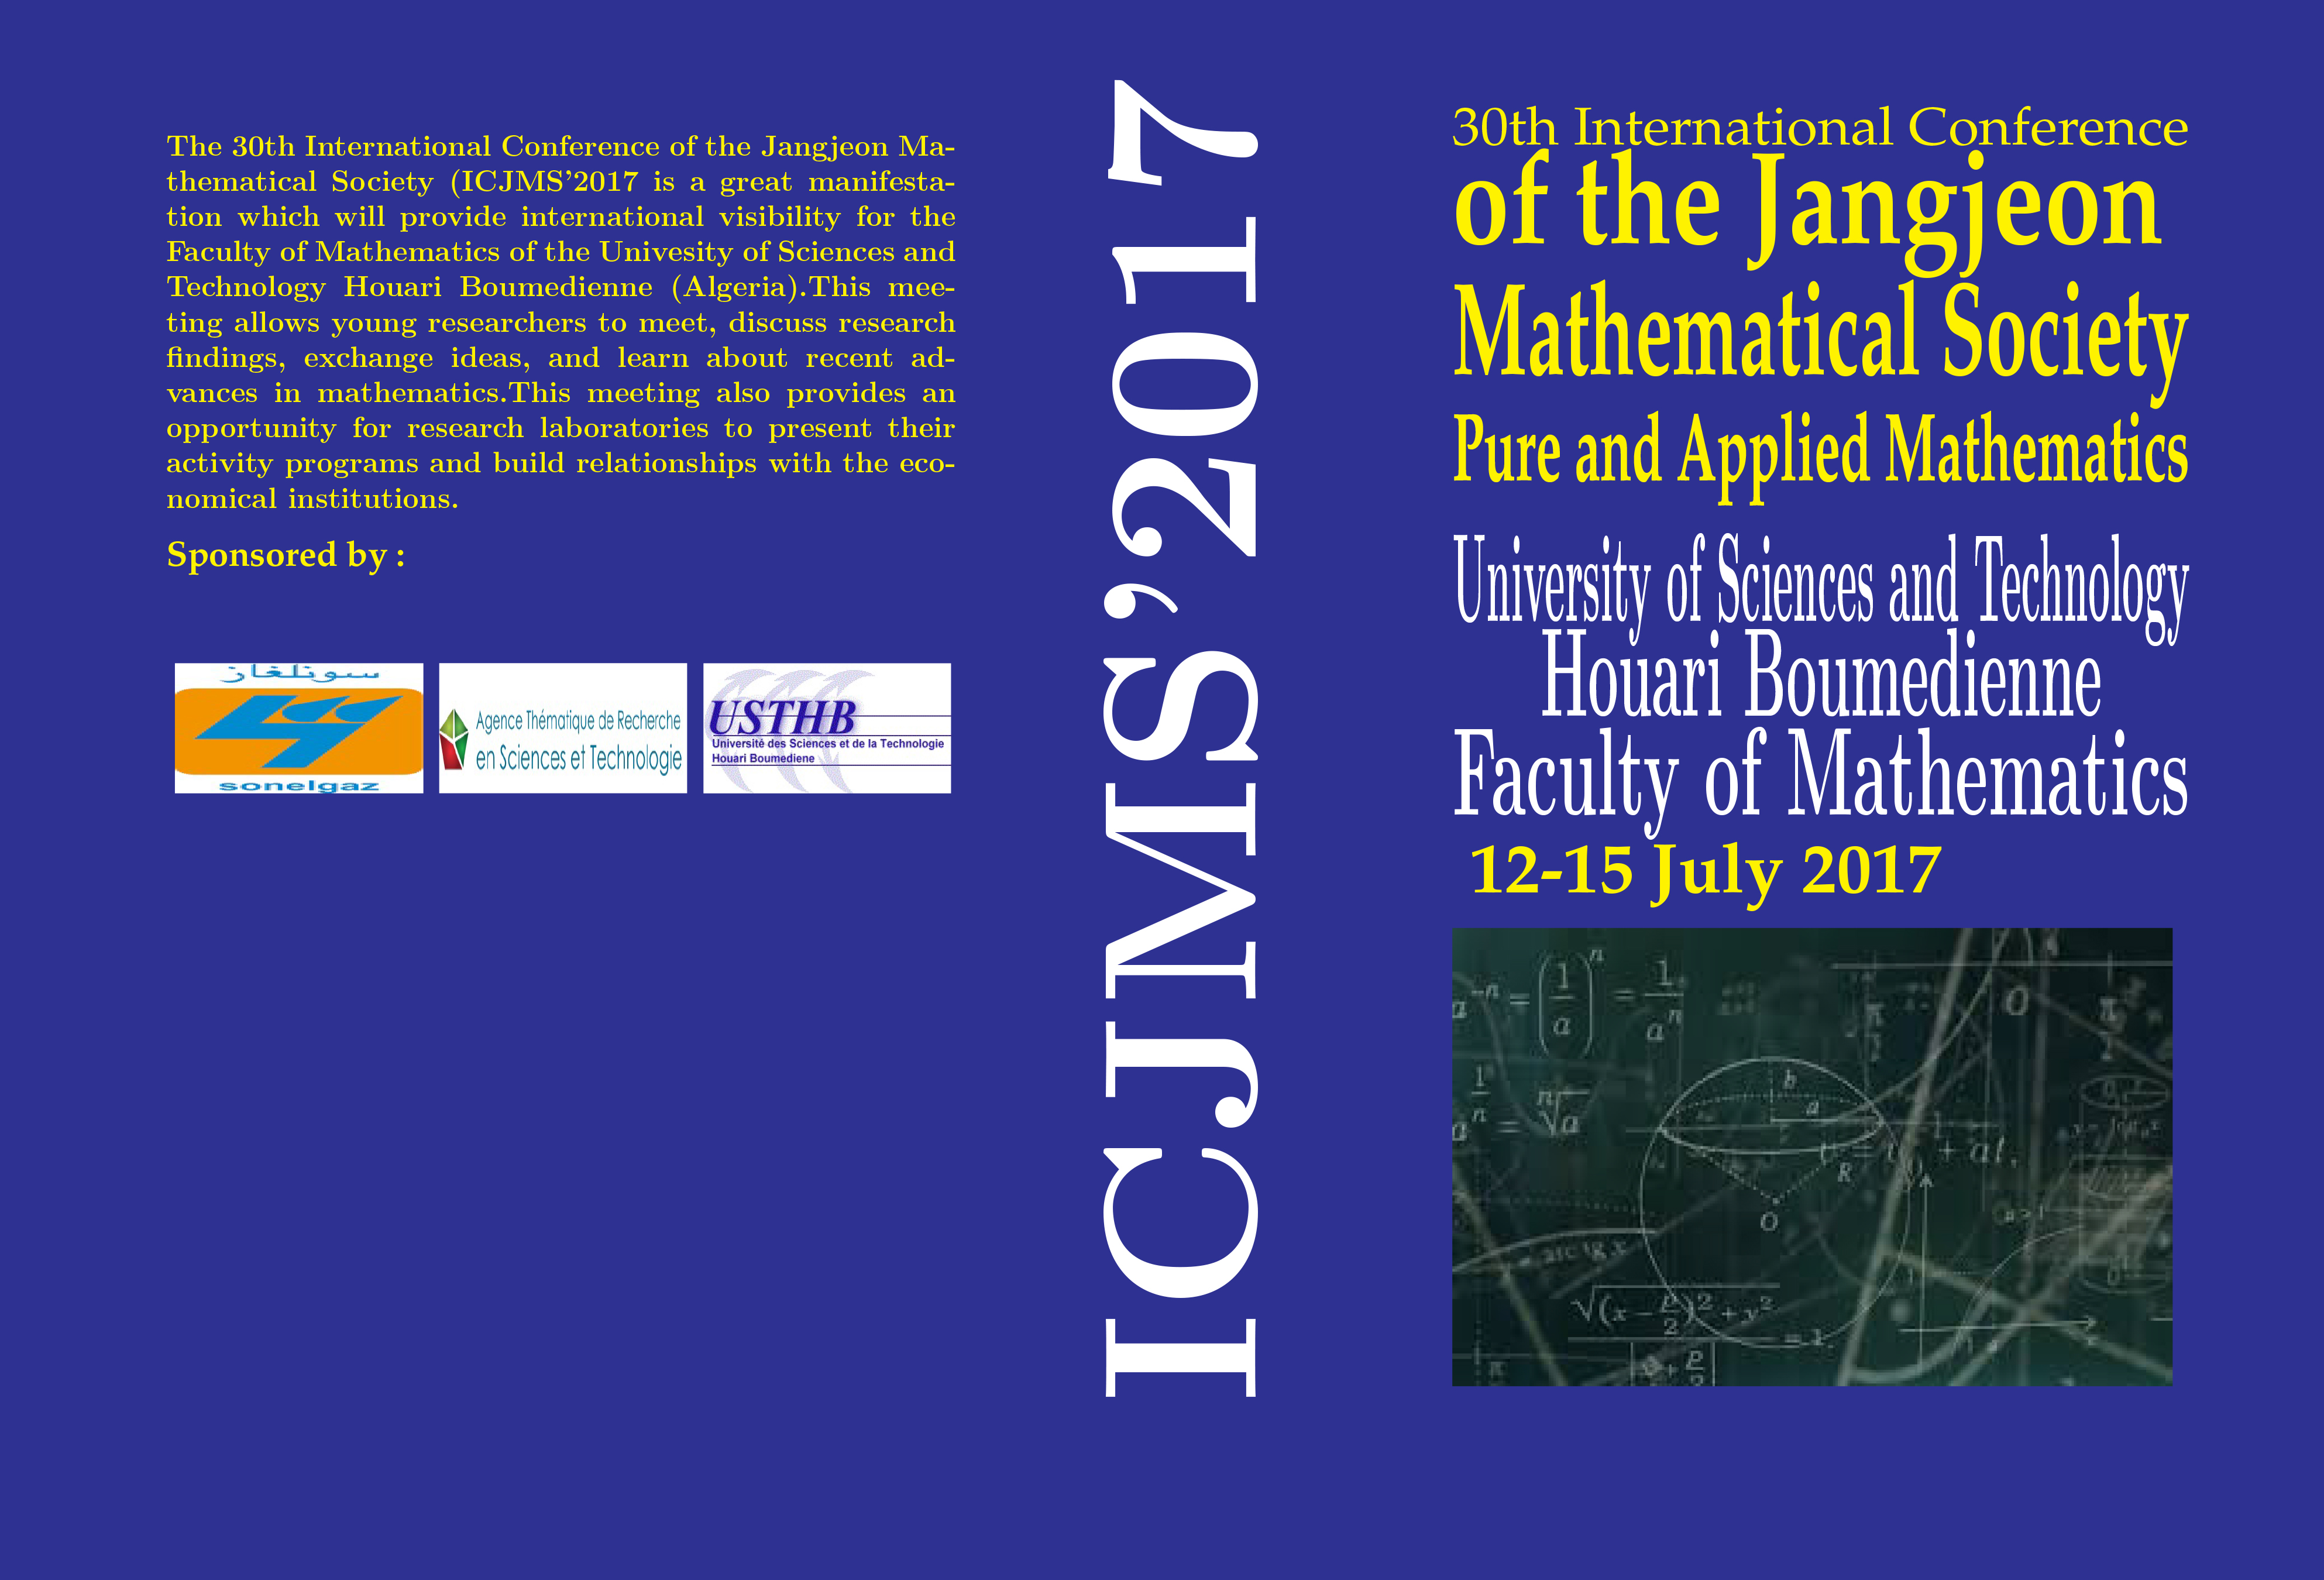 The 30th International Conférence of the Jangjeon Mathematical Society (ICJMS2017); 12-15 juillet 2017